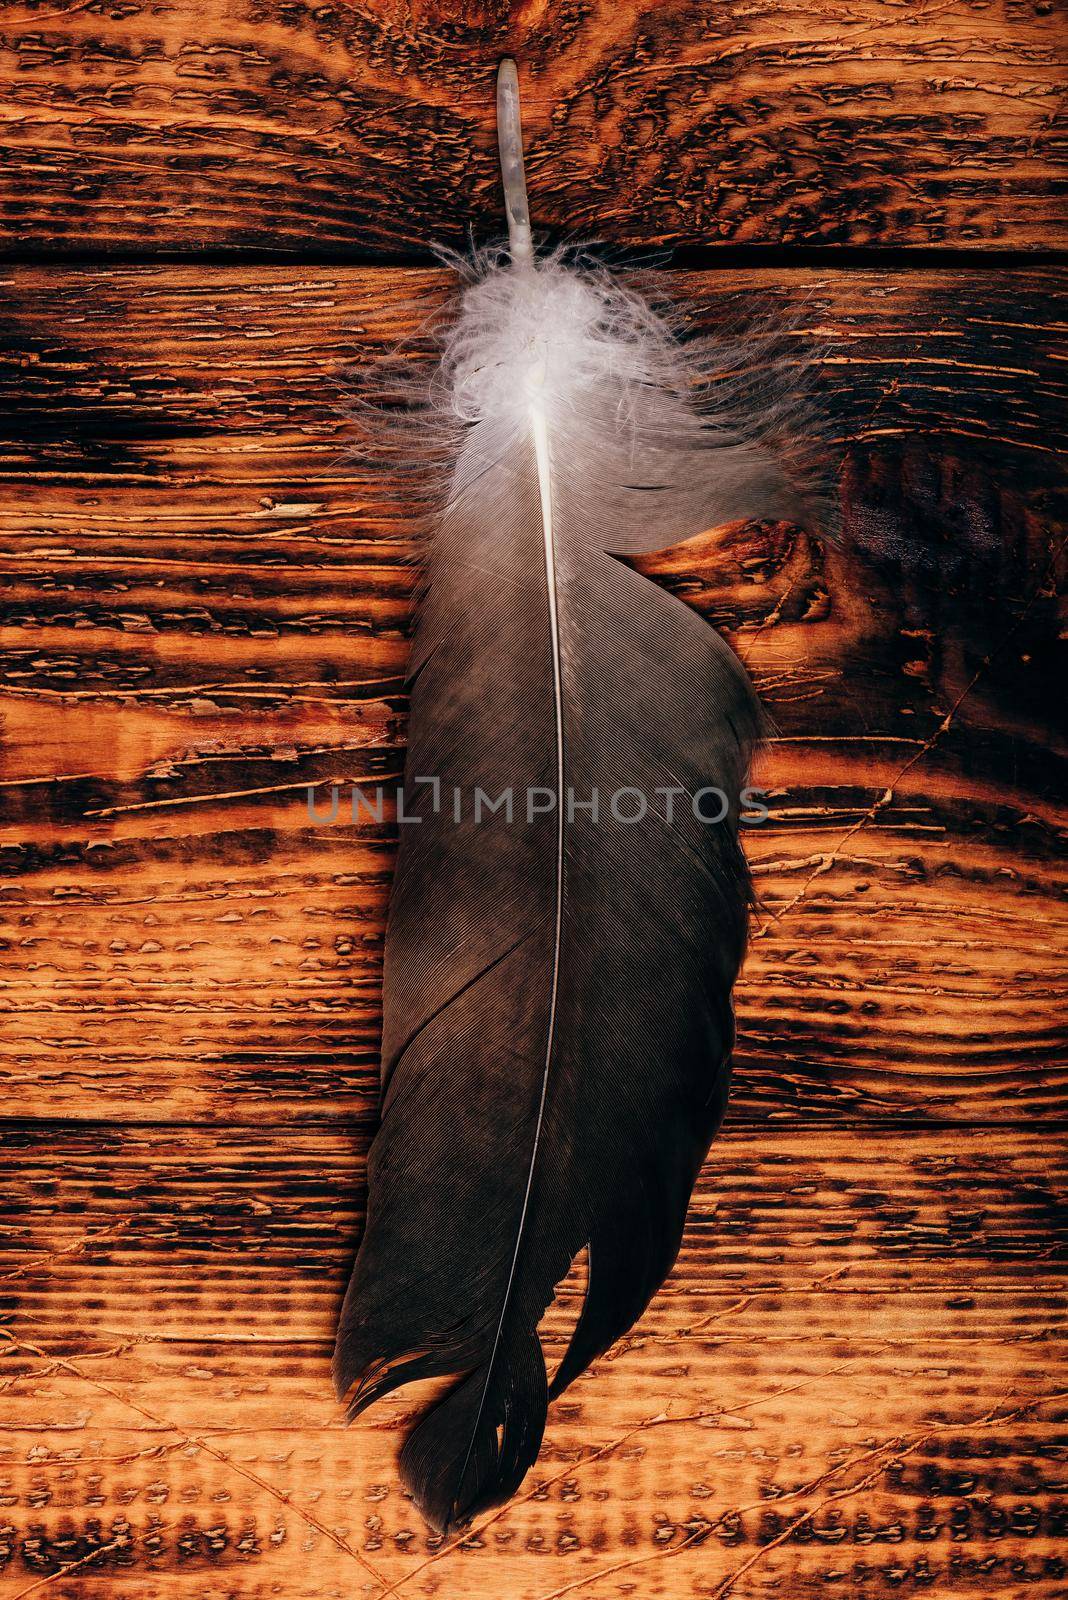 Hawk feather over wooden table by Seva_blsv